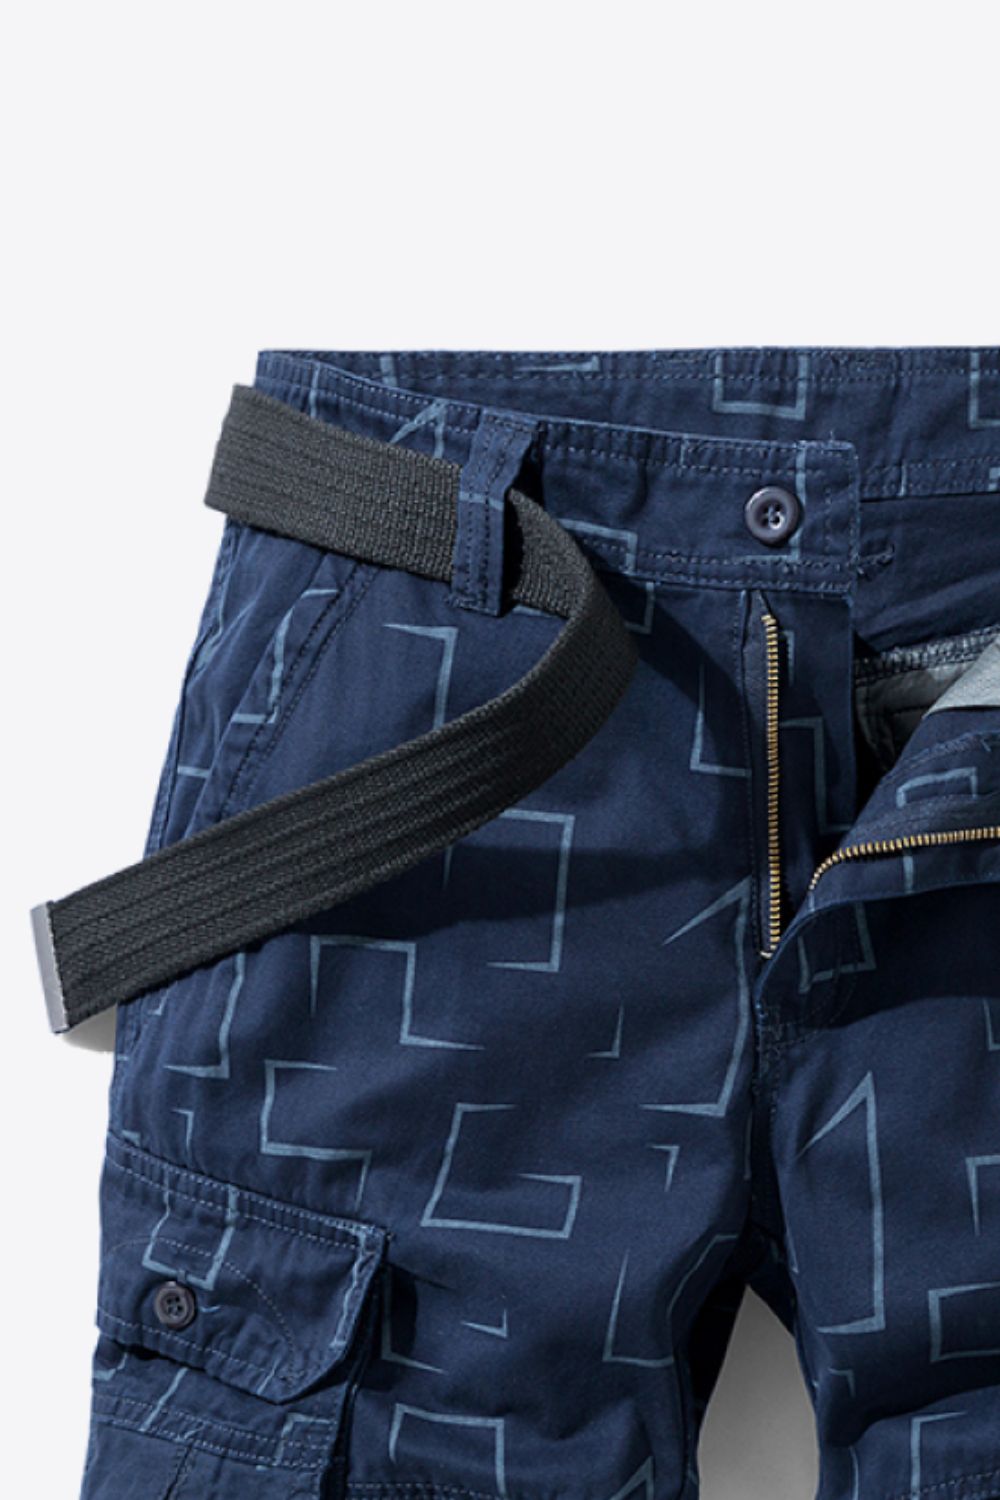 Printed Belted Cargo Shorts